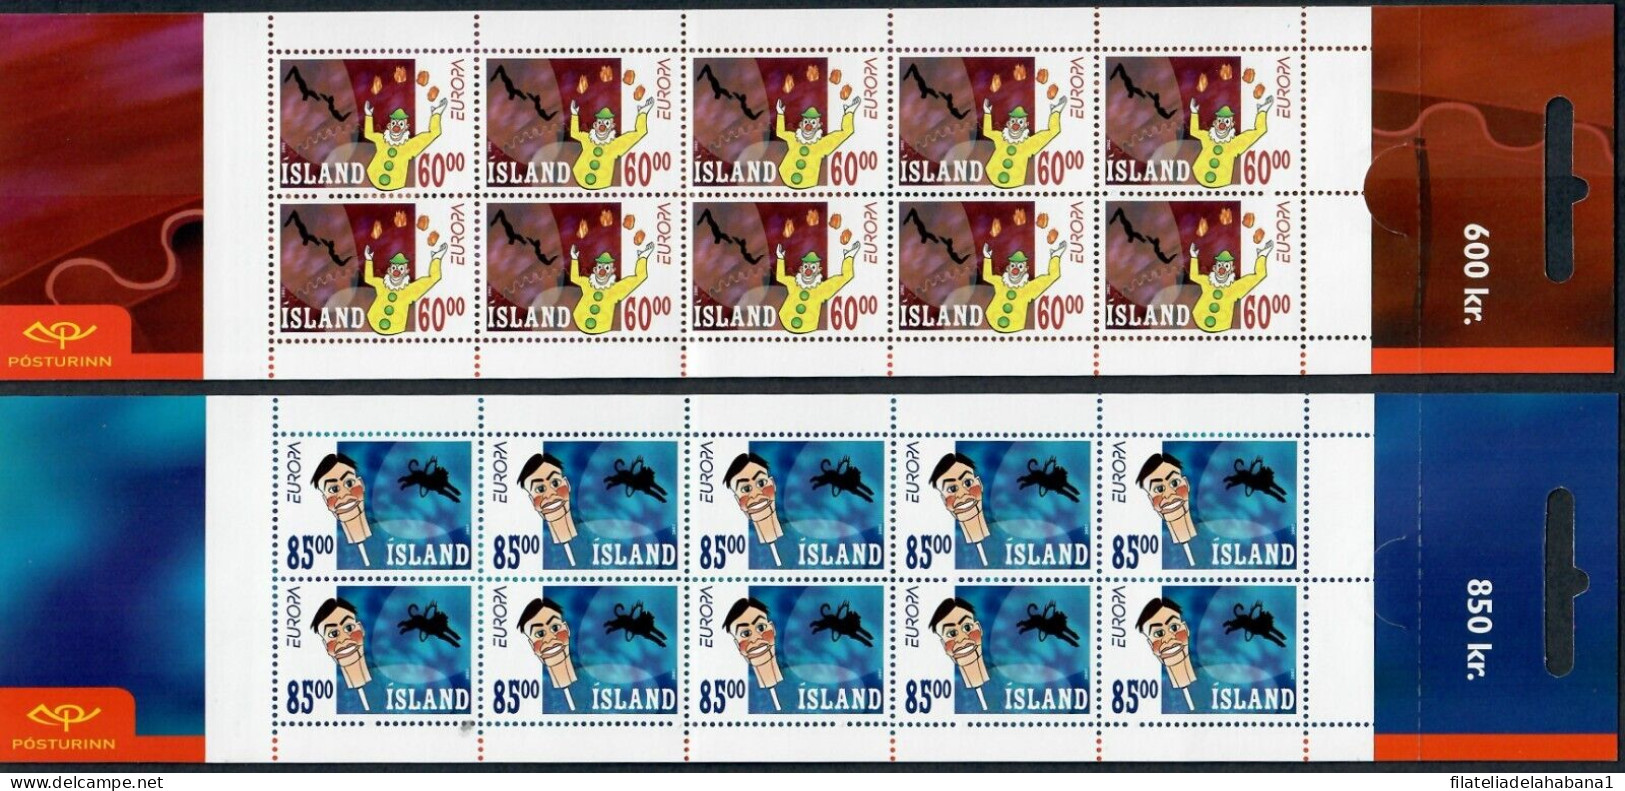 F-EX50055 ICELAND MNH 2002 EUROPA BOOKLED SET CIRCUS.  - Unused Stamps